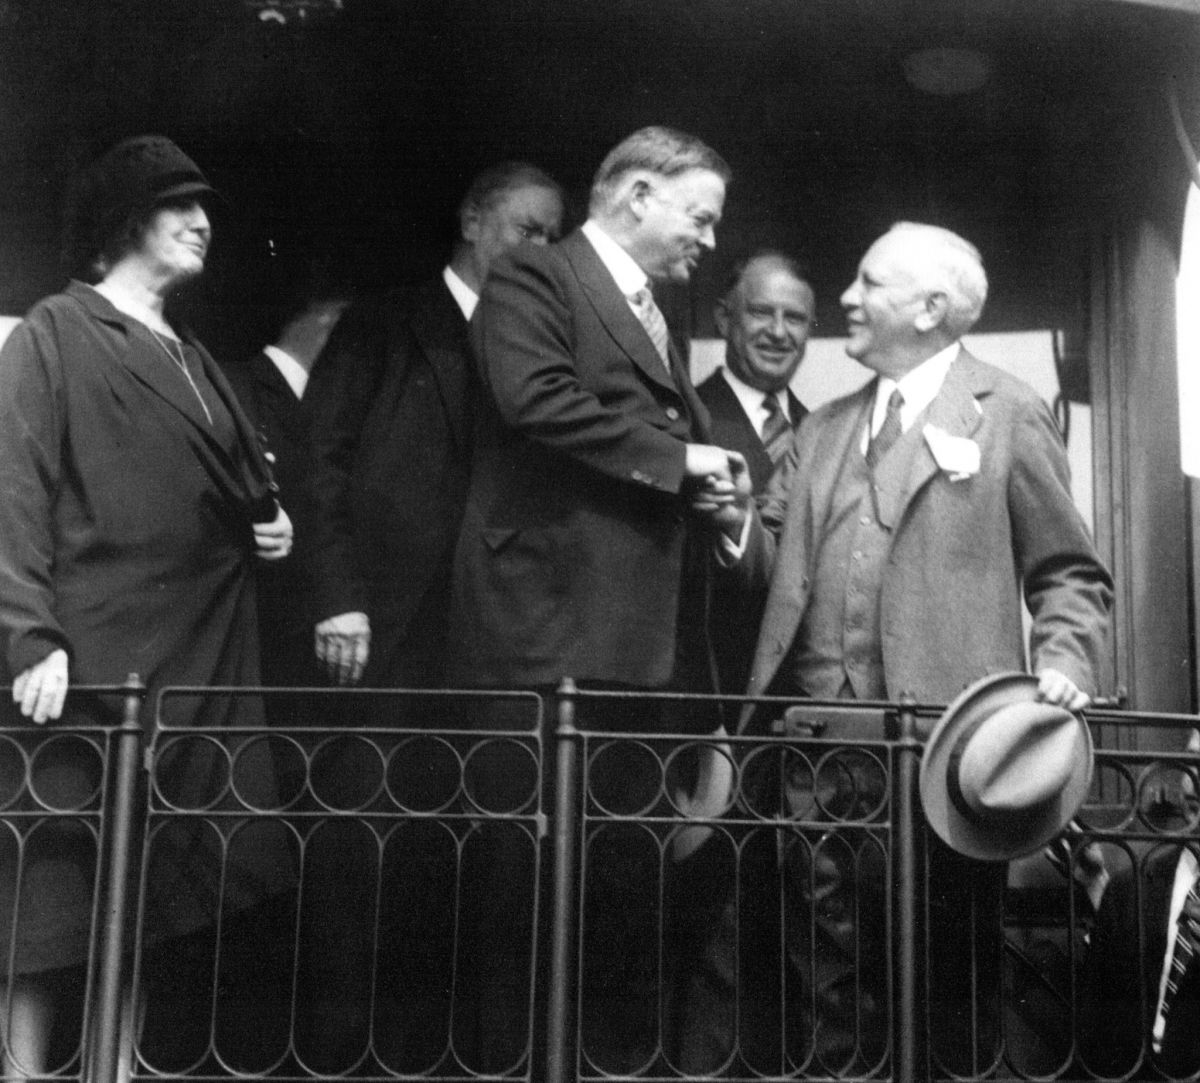 With Herbert Hoover
At the South Street Station
Photo from Bobby Cole
